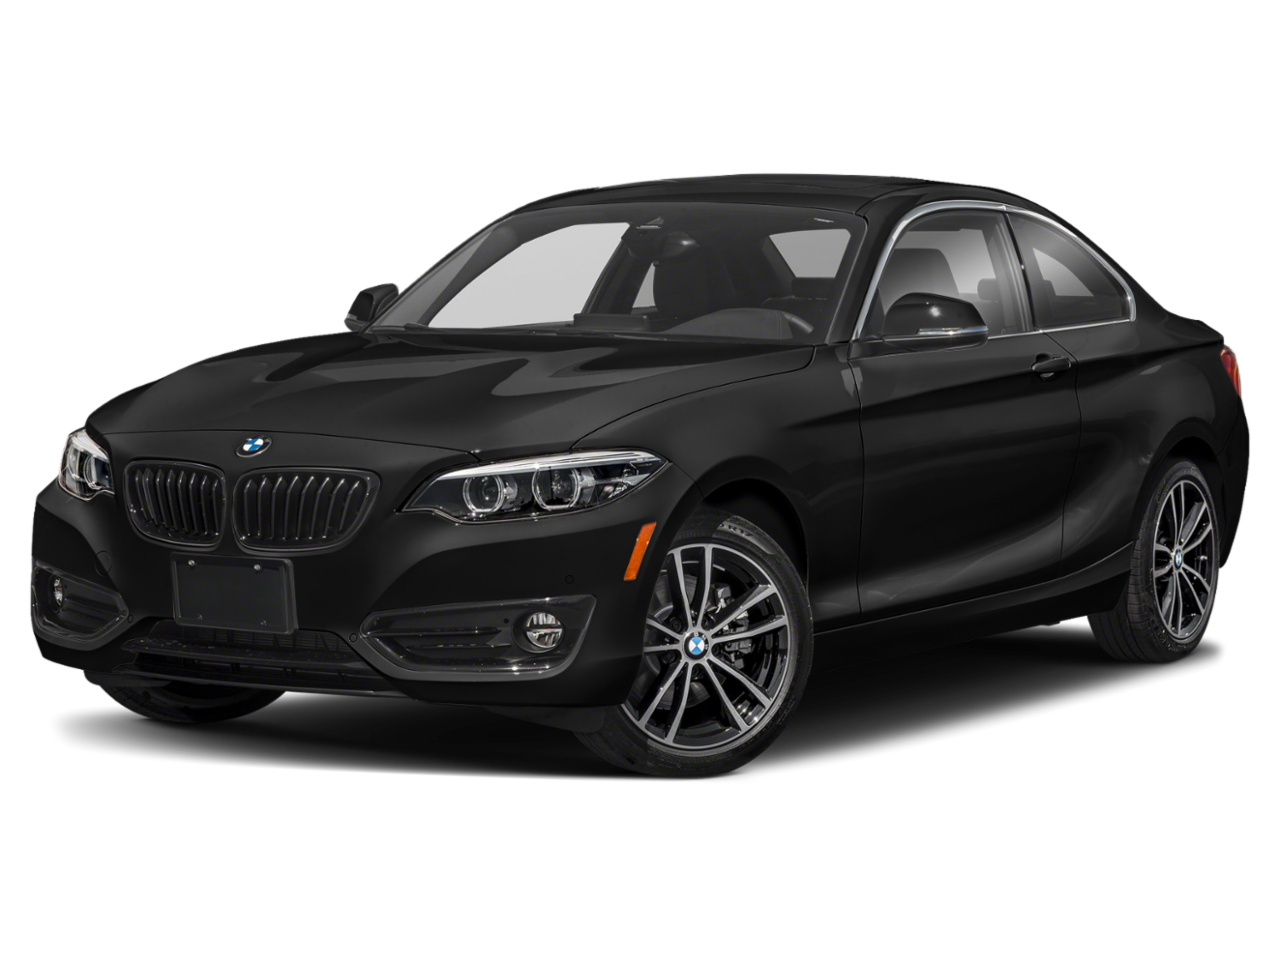 New 2021 BMW 230i xDrive Details from Garlyn Shelton Auto Group's